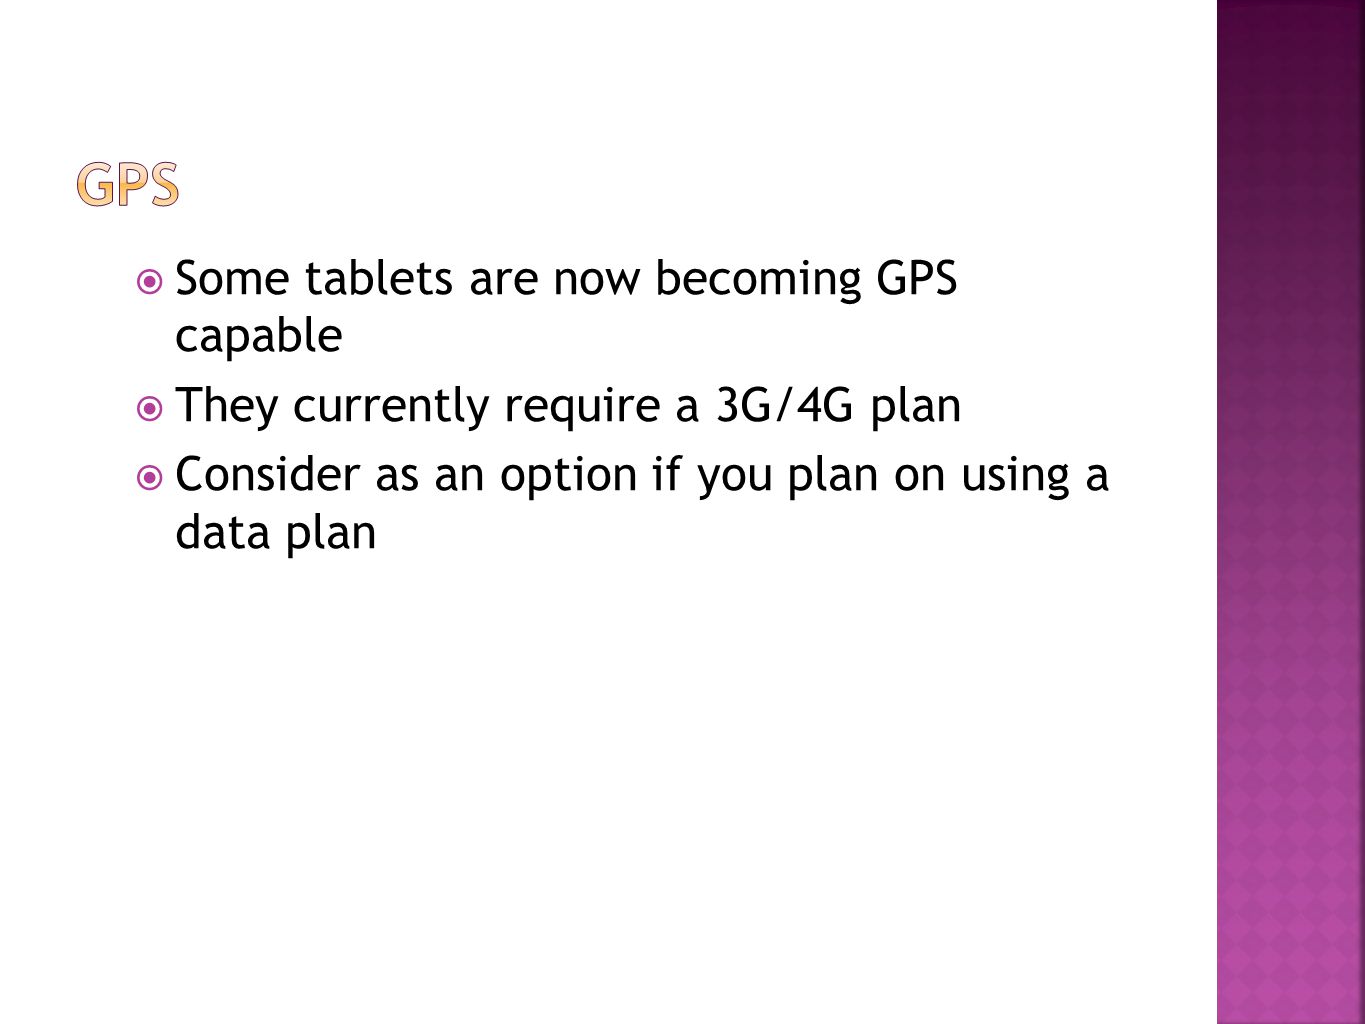  Some tablets are now becoming GPS capable  They currently require a 3G/4G plan  Consider as an option if you plan on using a data plan